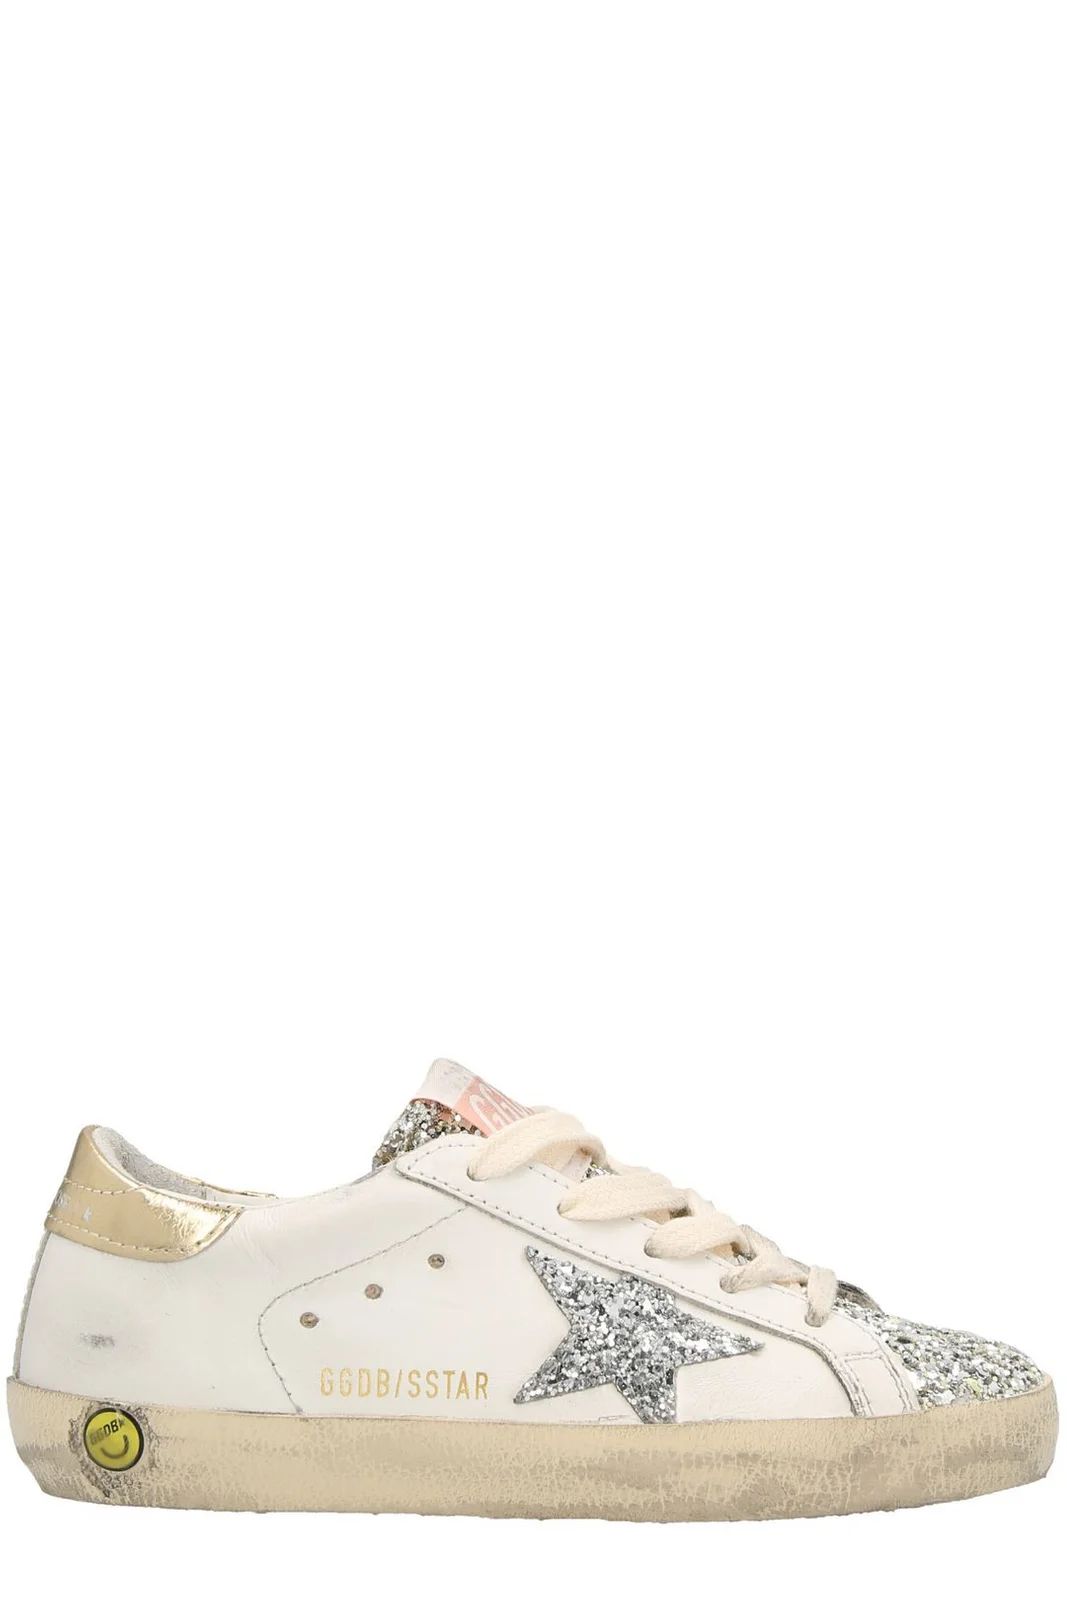 Golden Goose Kids Super Star Lace-Up Sneakers | Cettire Global